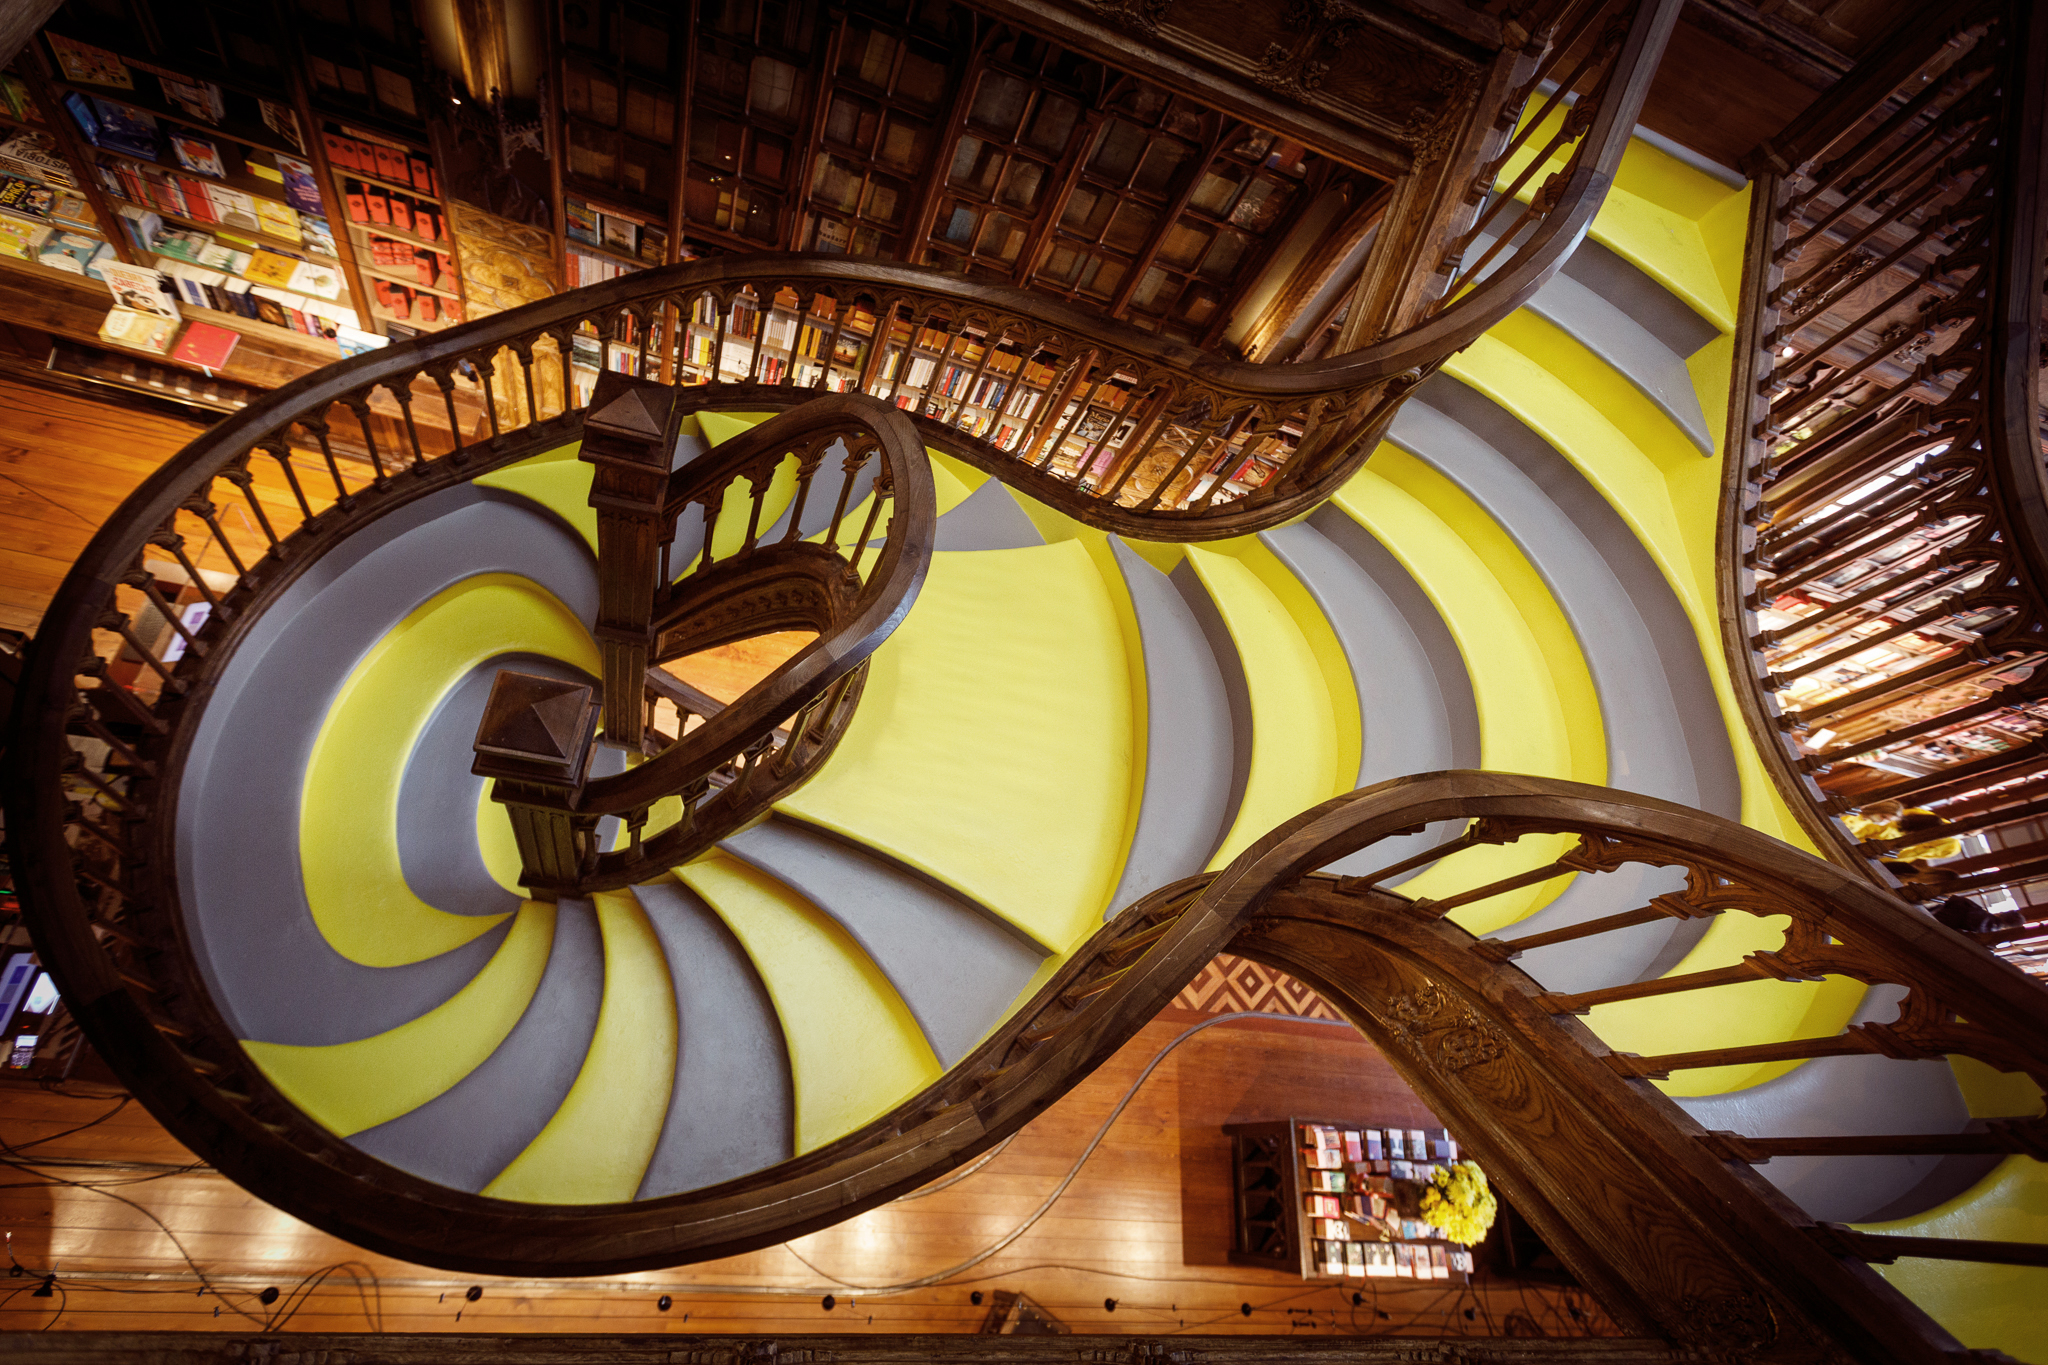 Partnership with PANTONE® turns the iconic staircase of Livraria Lello yellow and gray